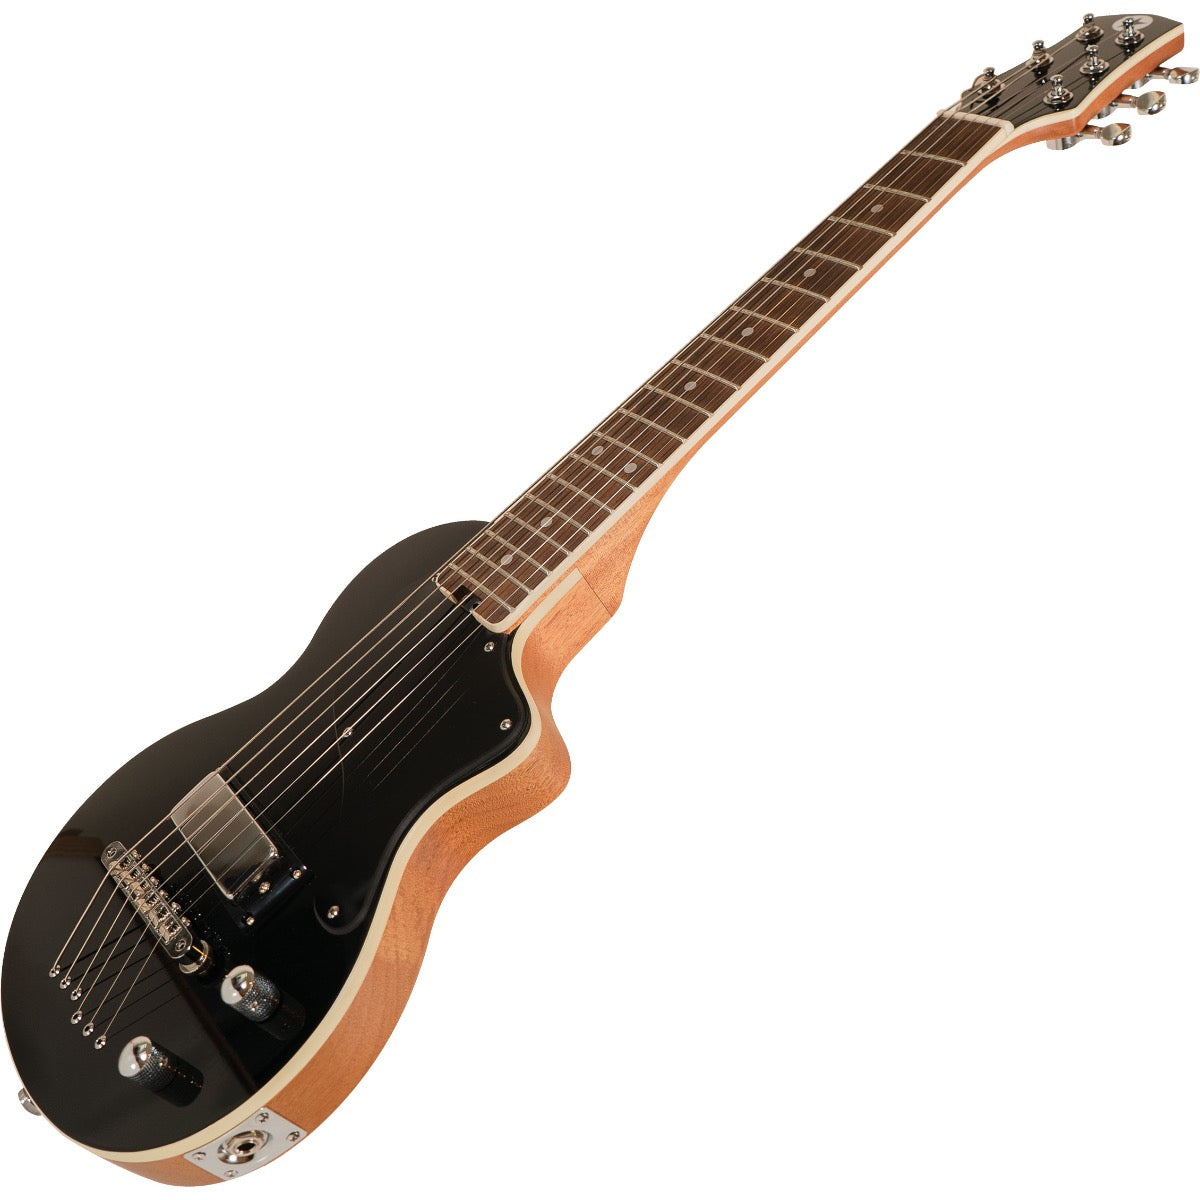 Perspective view of Blackstar Carry-On Travel Guitar - Black showing top and right side